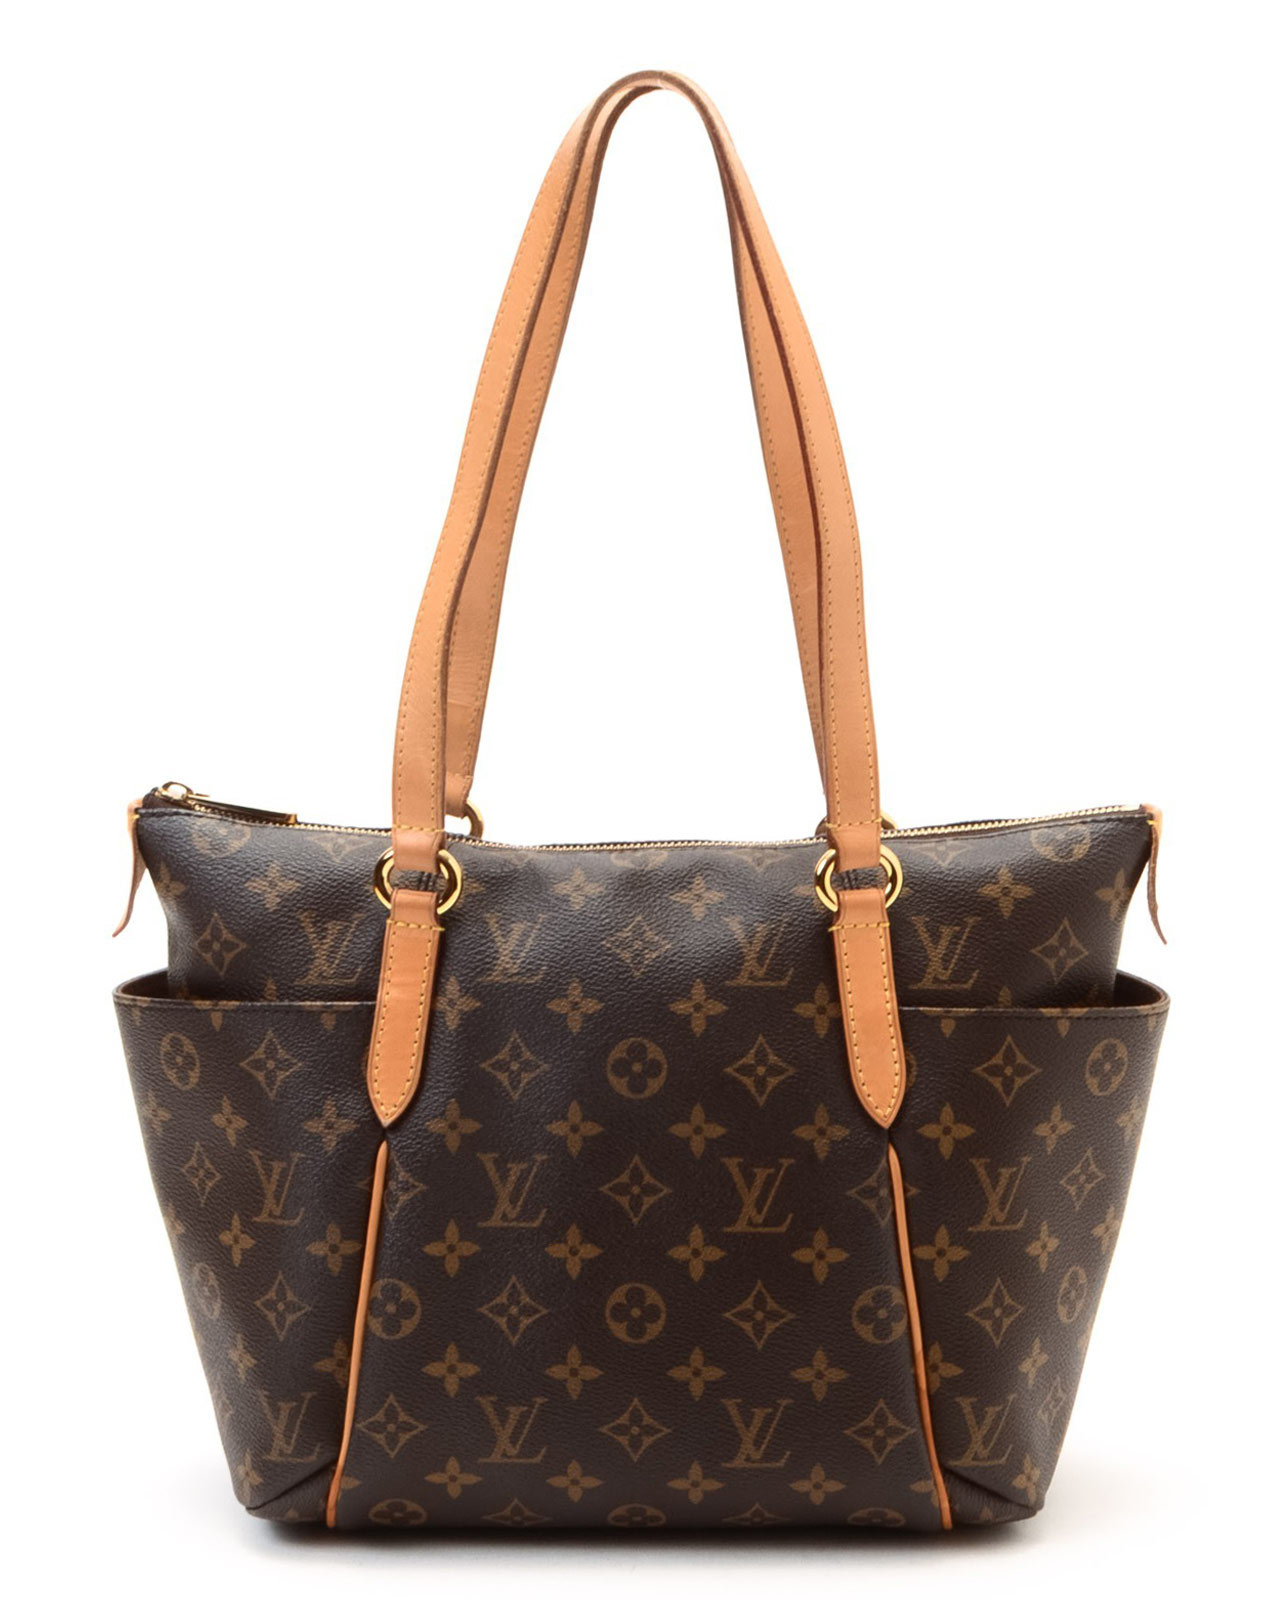 Lyst - Louis Vuitton Totally Pm Tote in Brown